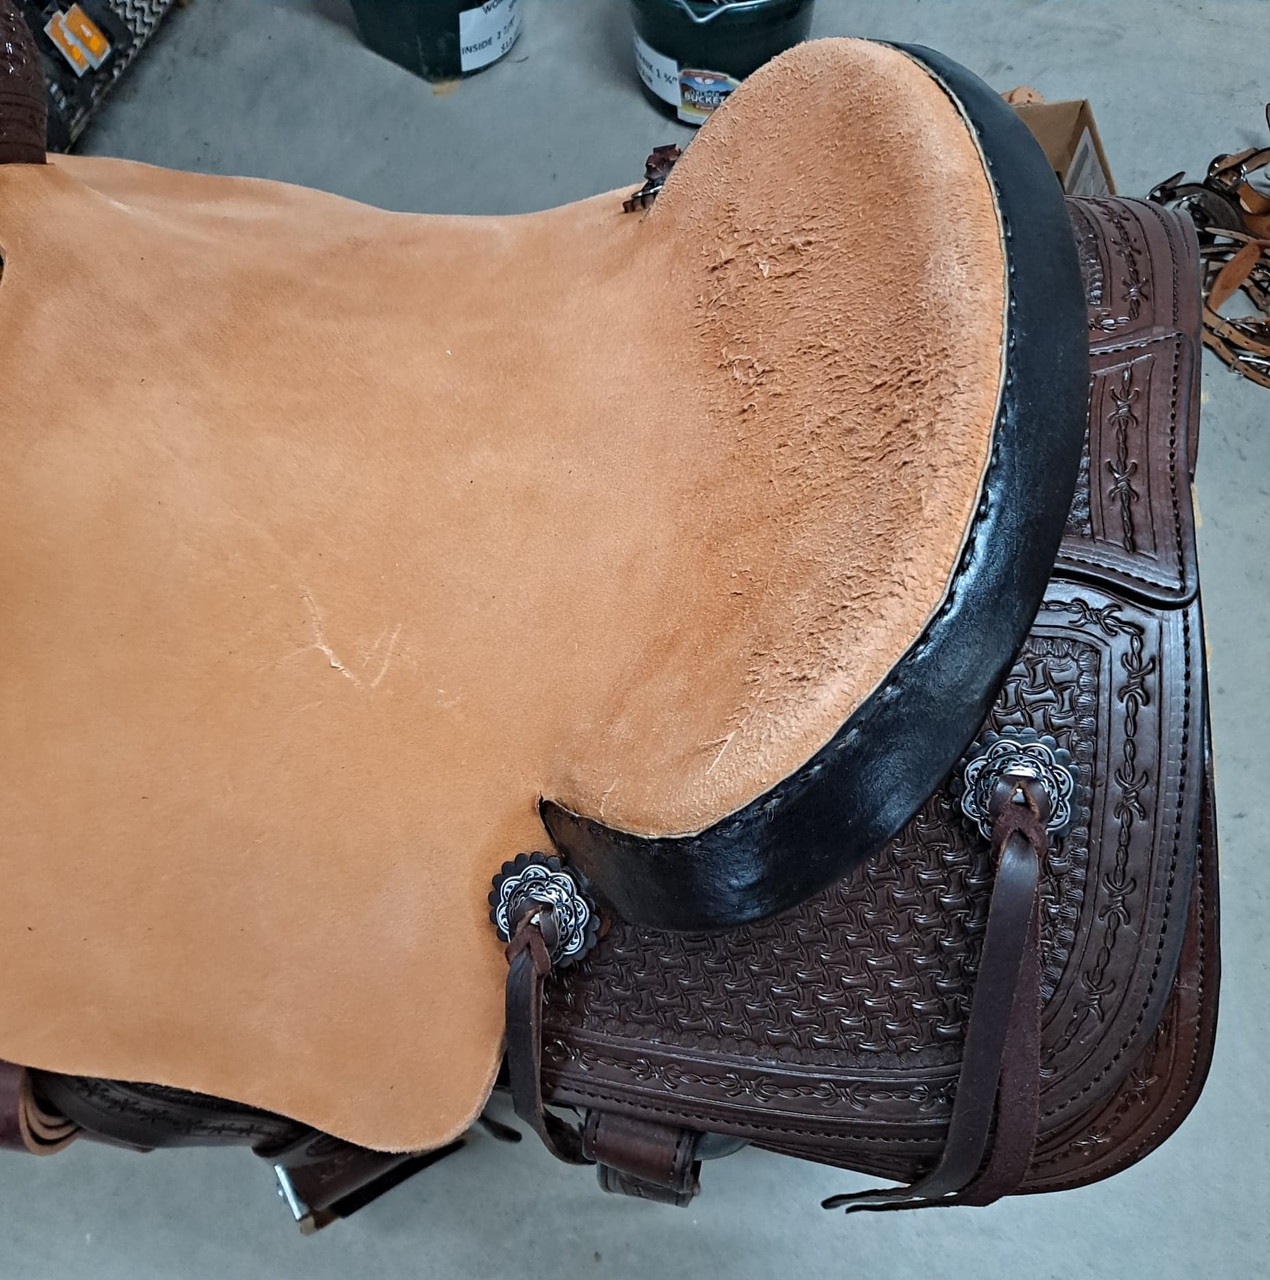 New Ranch Saddle by Fort Worth Saddle Co with 16 inch seat. Arizona Roper tree with oversized post. Dark brown with black accents. Gullet size is 7.5 inch, weight is 36lbs, and skirt is 28 inch. Made in USA. Limited lifetime warranty.

S1514